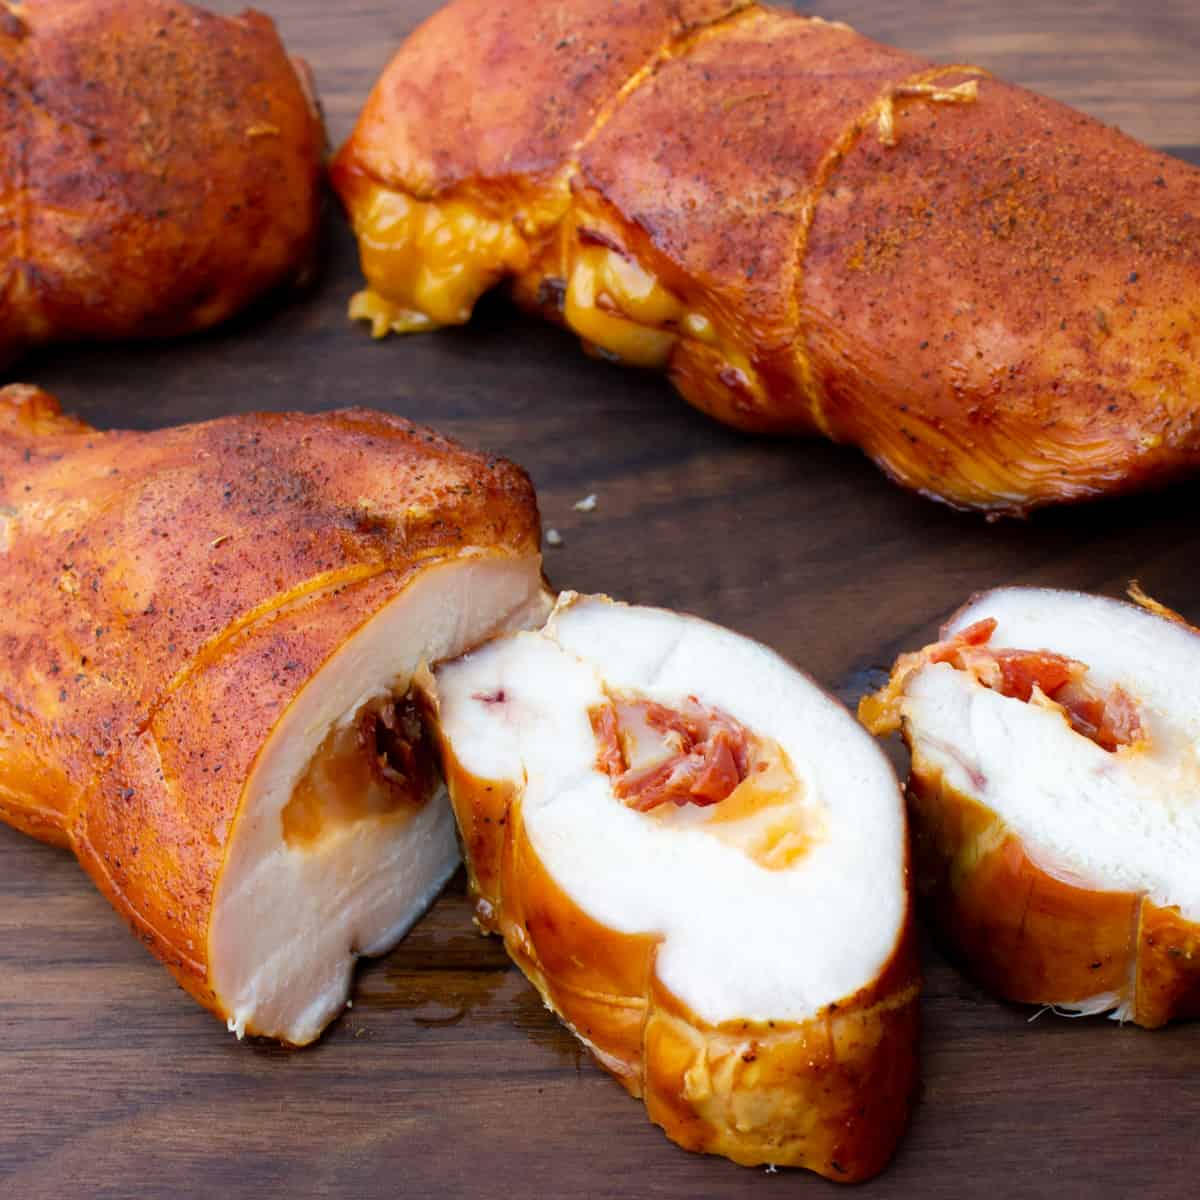 Smoked chicken breast with stuffing.